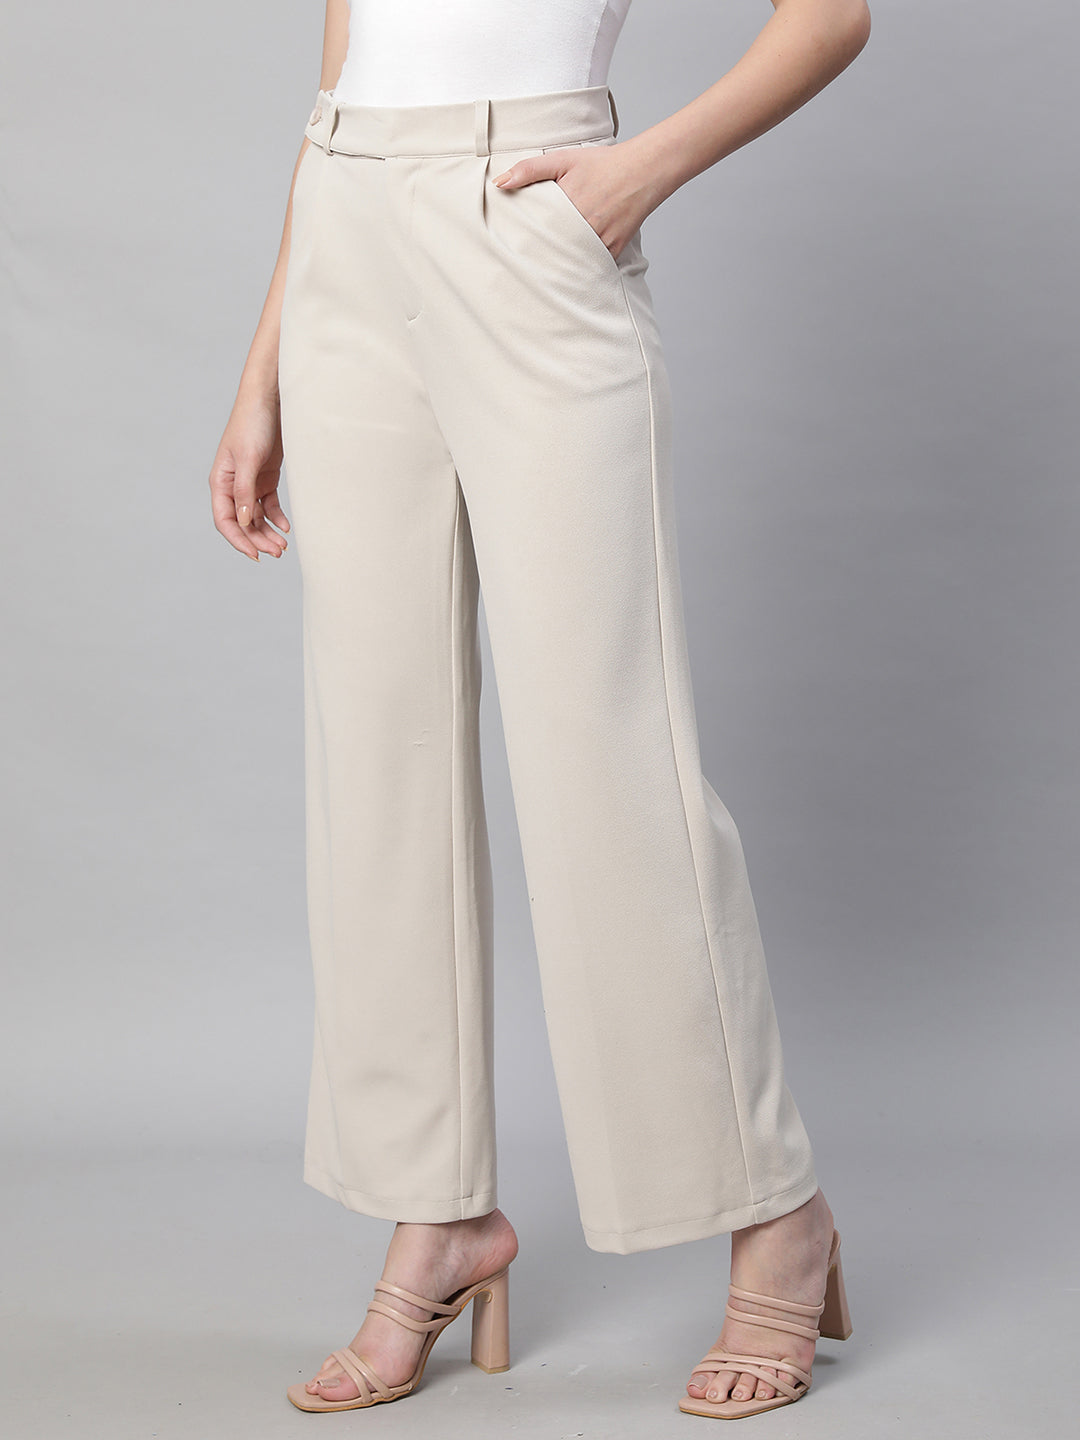 Trousers  Kate Sylvester Shop For Womens  Mens  Adarshitibhopal